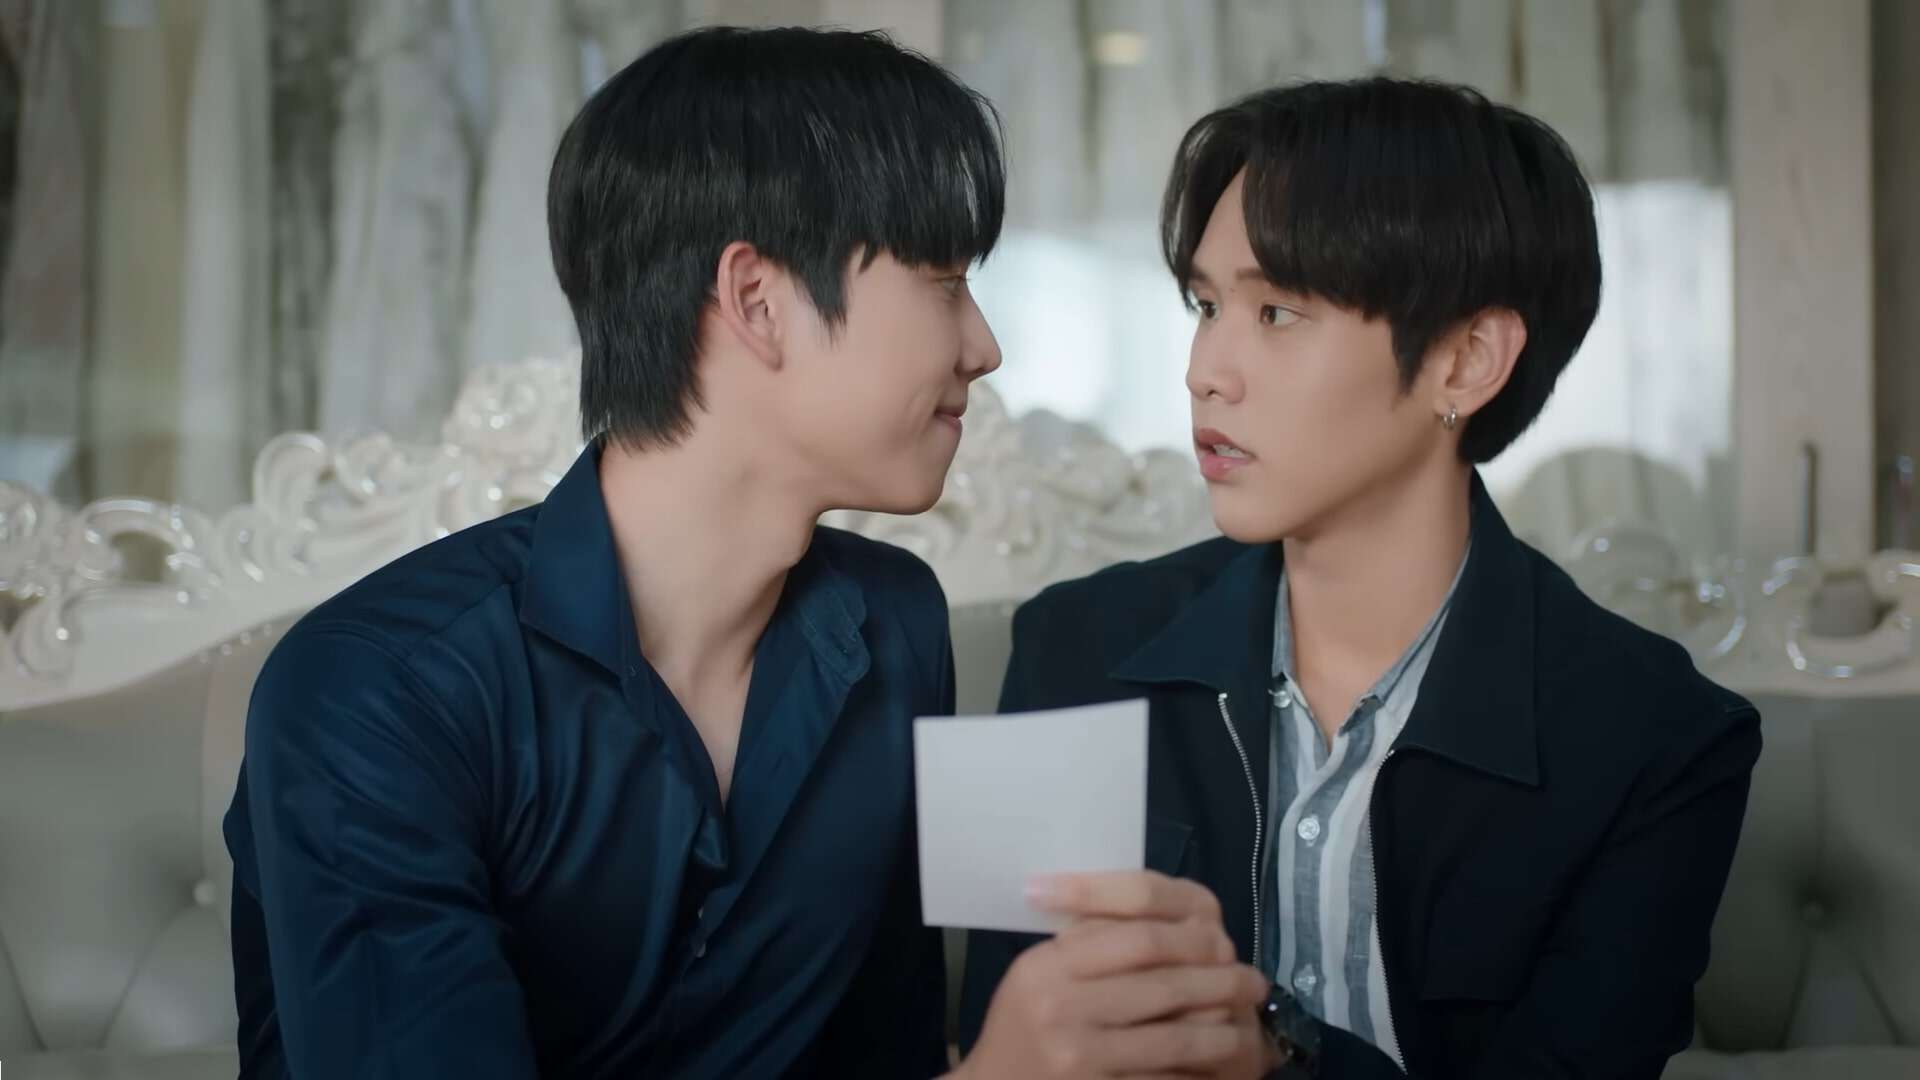 Wedding Plan The Series Episode 3: Release Date, Preview & Streaming Guide